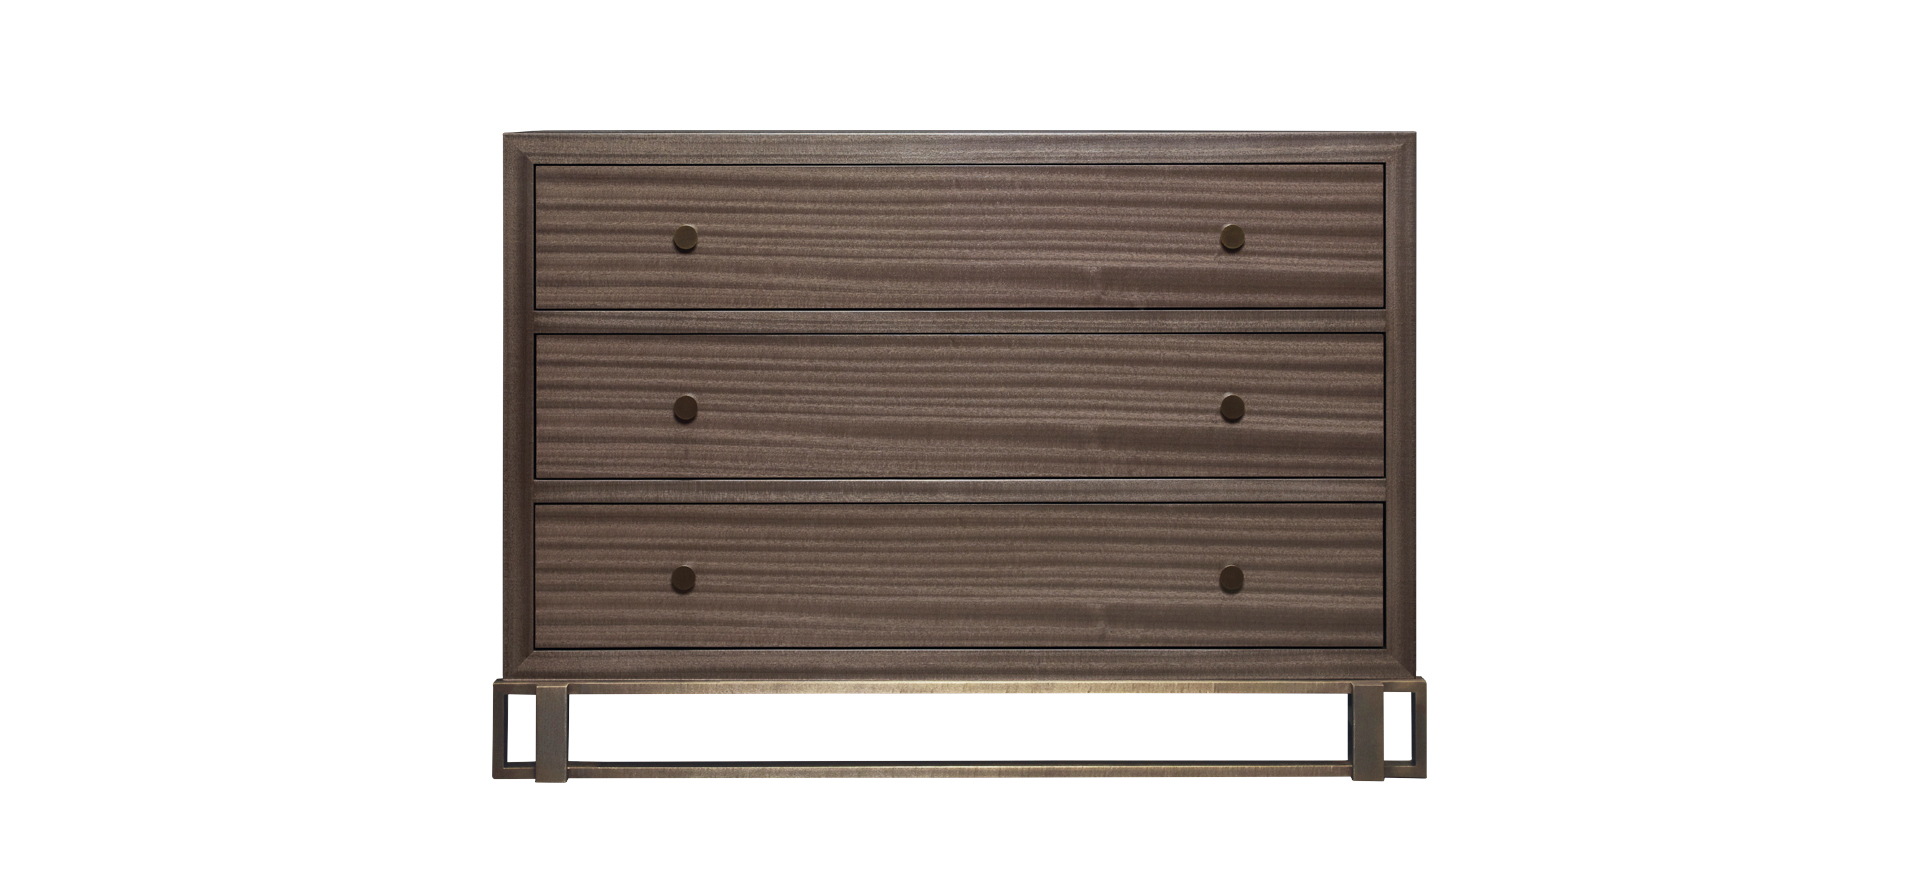 /mediaMargot%20is%20a%20wooden%20chest%20of%20drawers%20with%20metal%20details%20and%20bronze%20base%20and%20knobs%20from%20Promemoria's%20catalogue%20|%20Promemoria